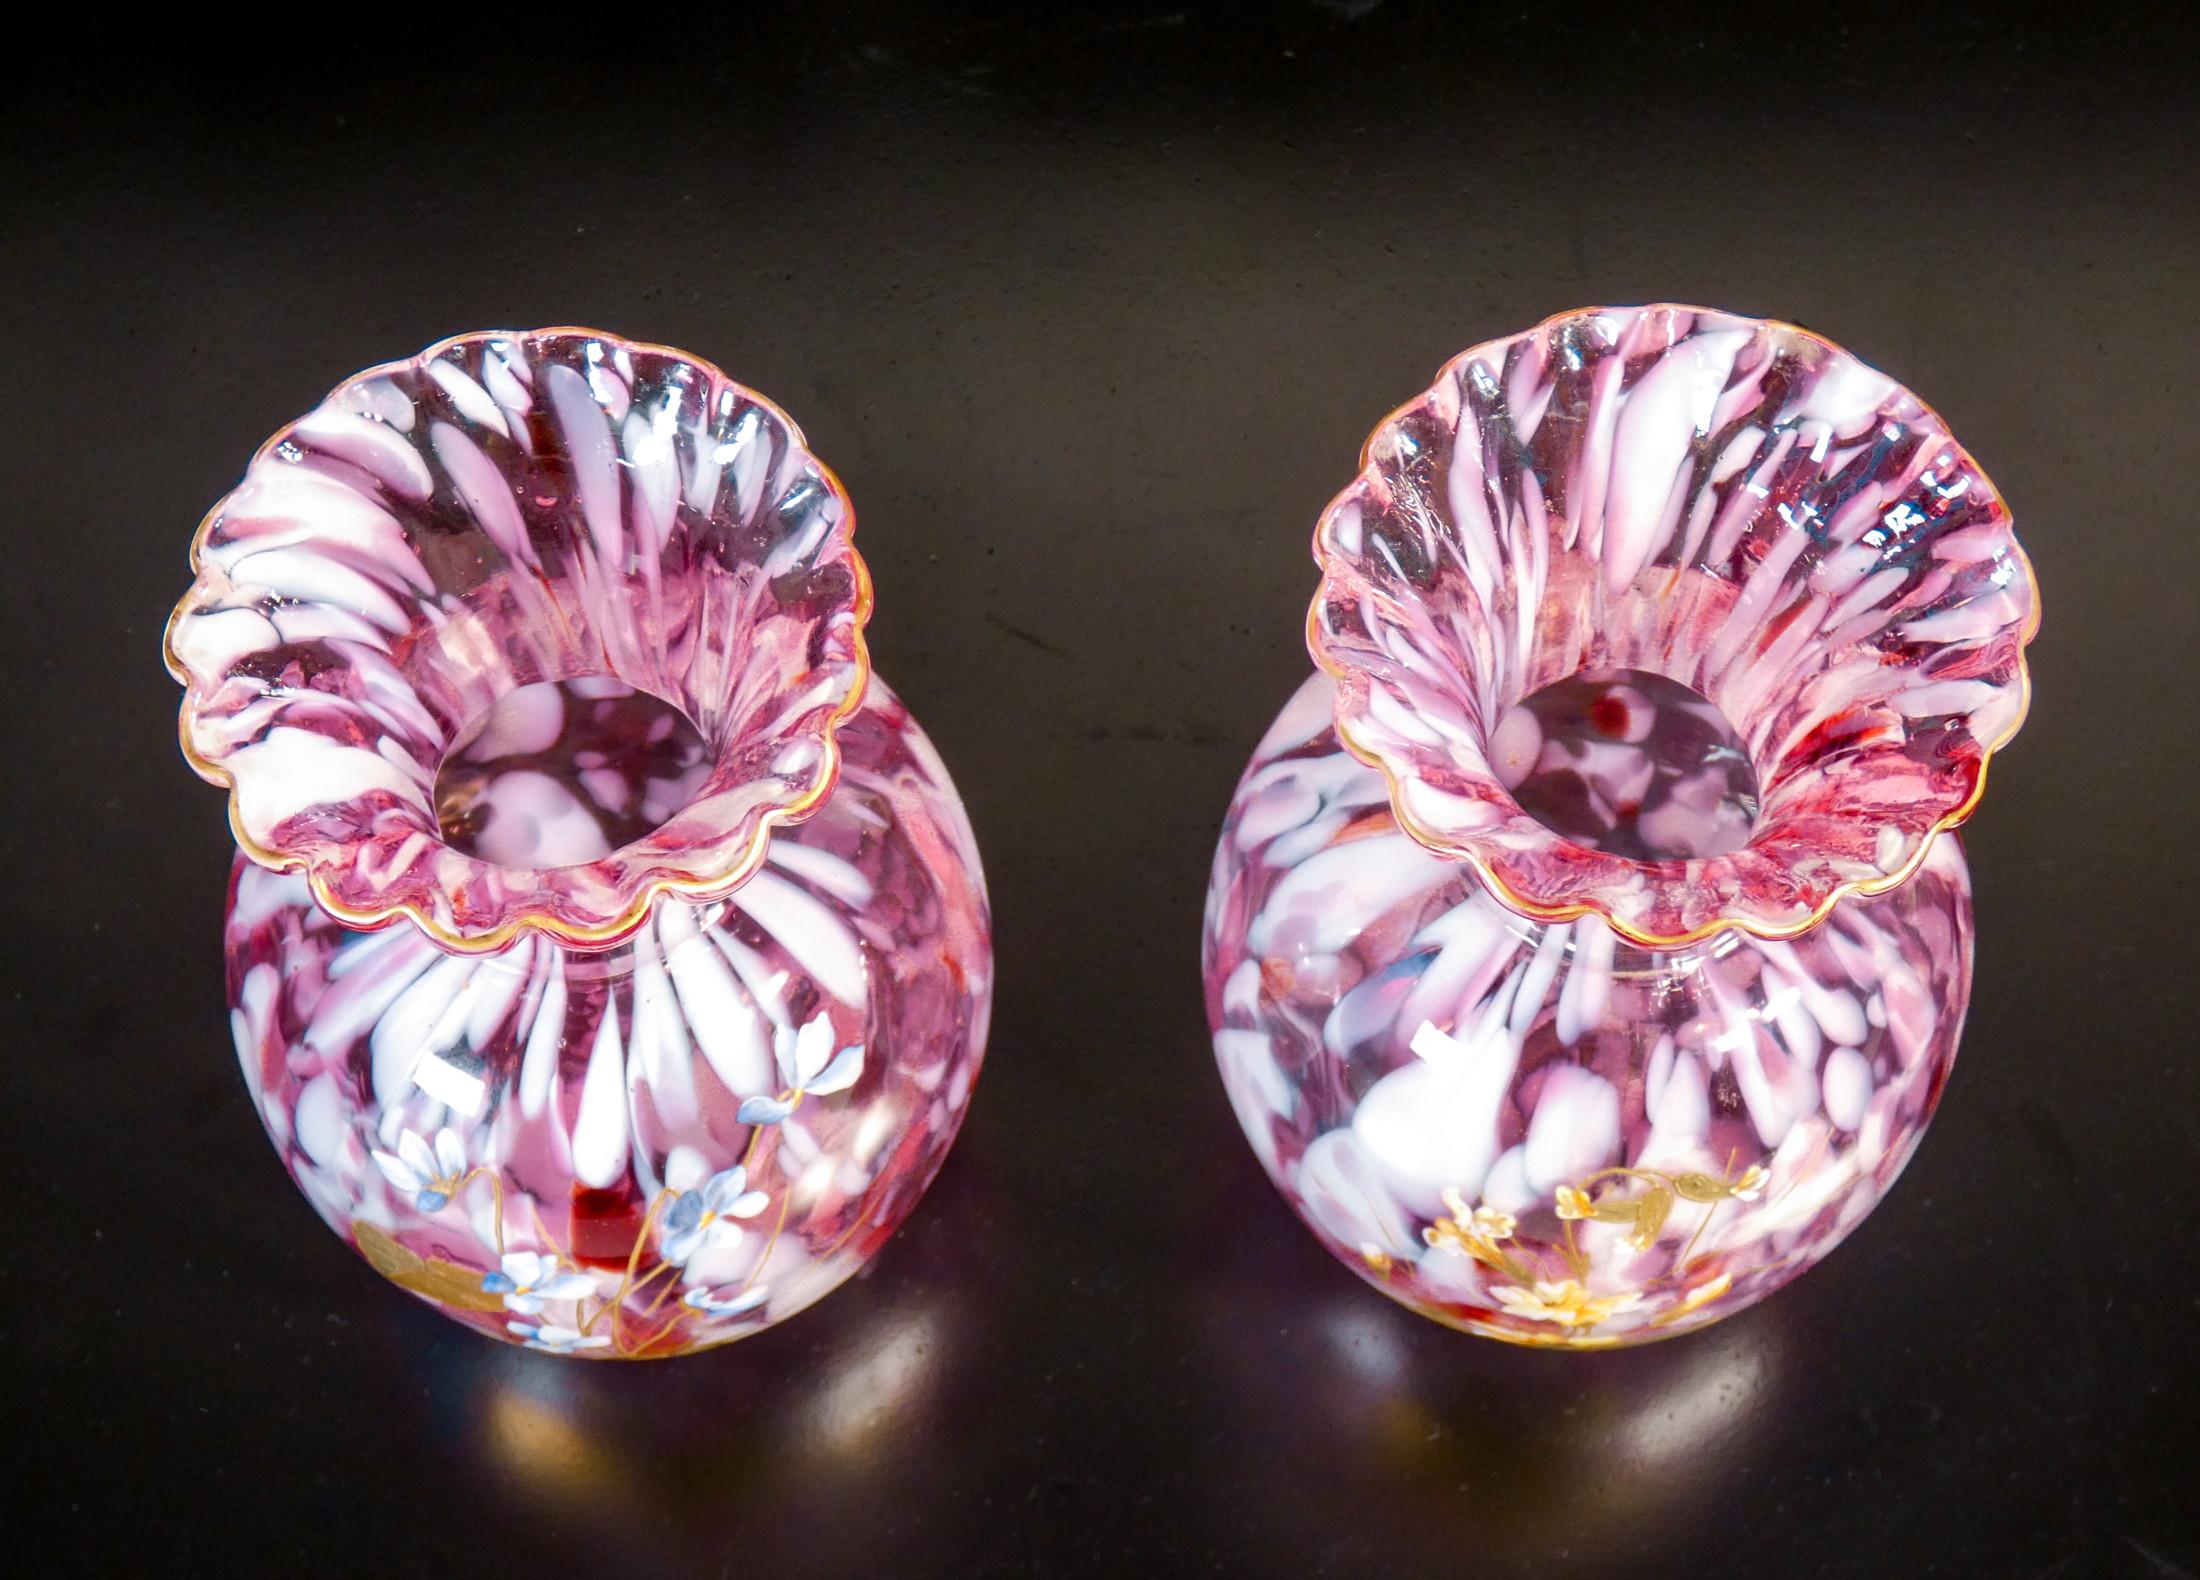 Other Pair of Blown Glass Vases, 